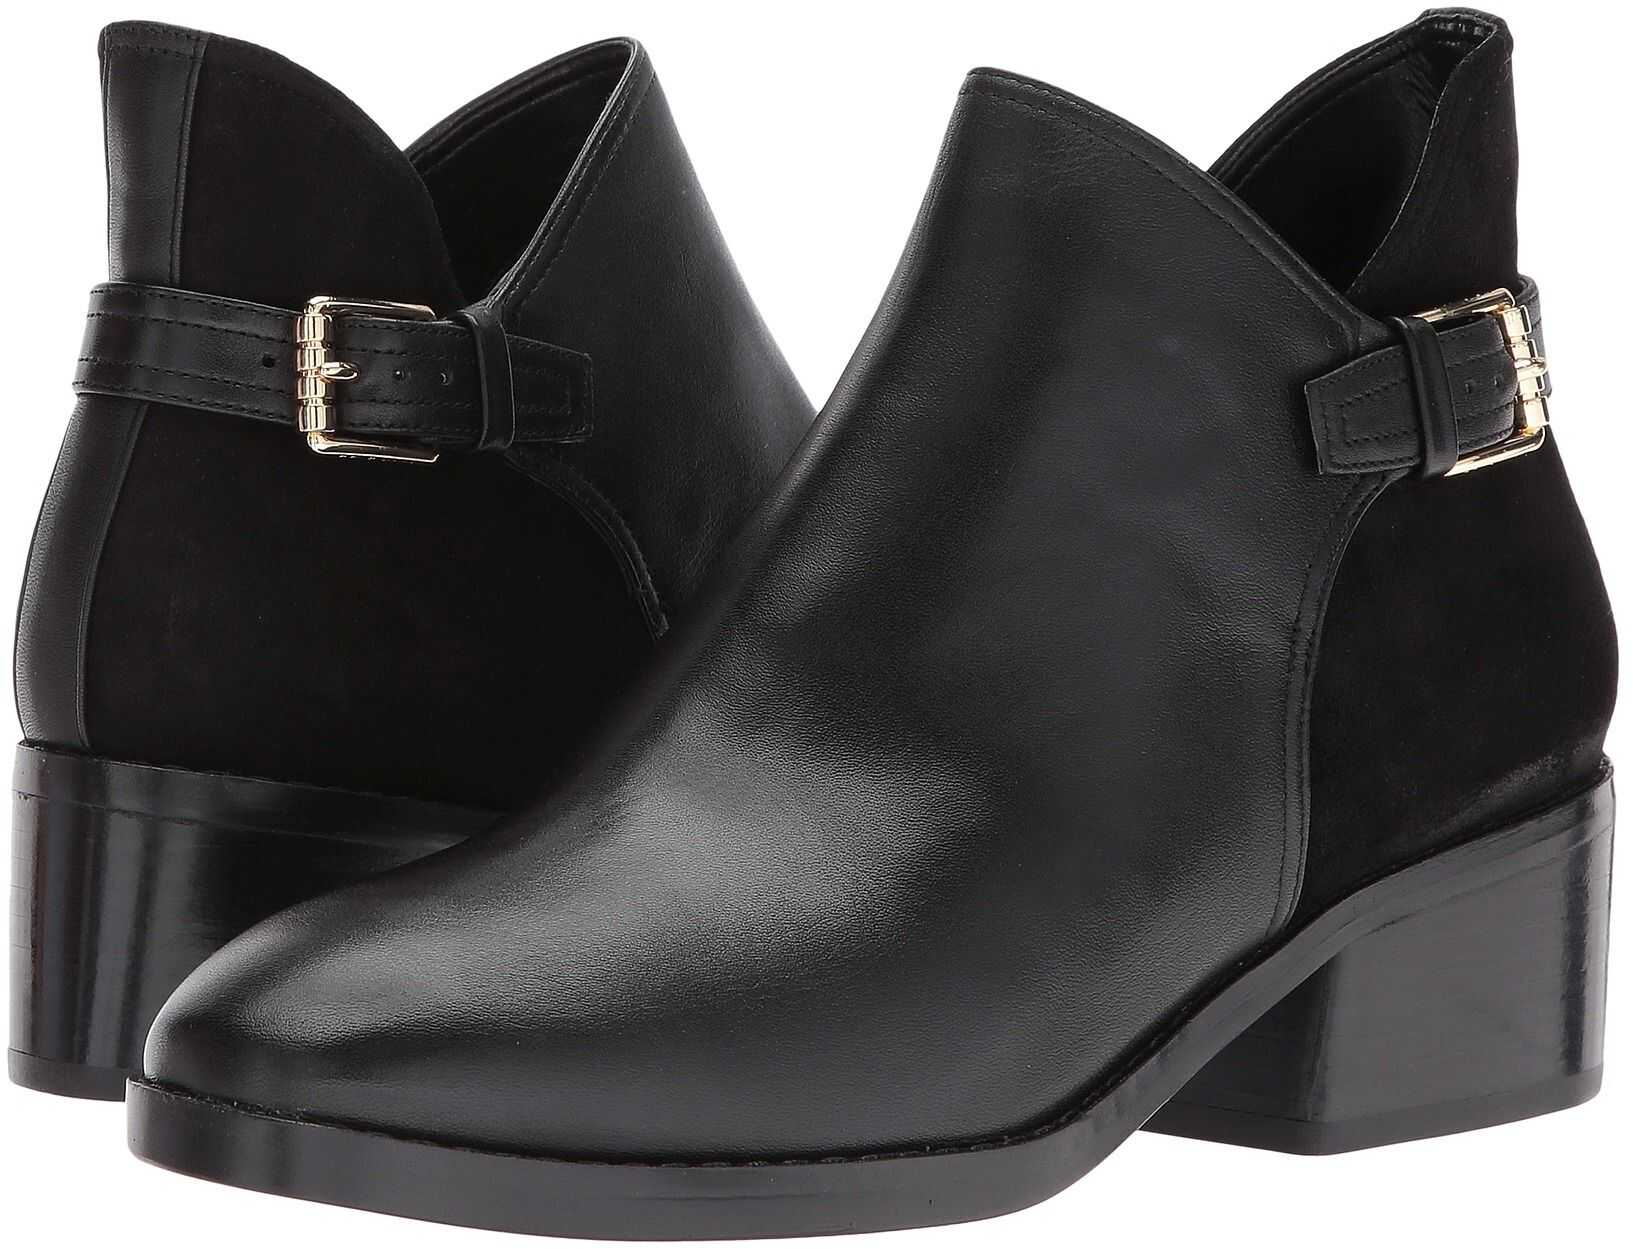 Cole Haan Althea Bootie* Black Leather/Suede